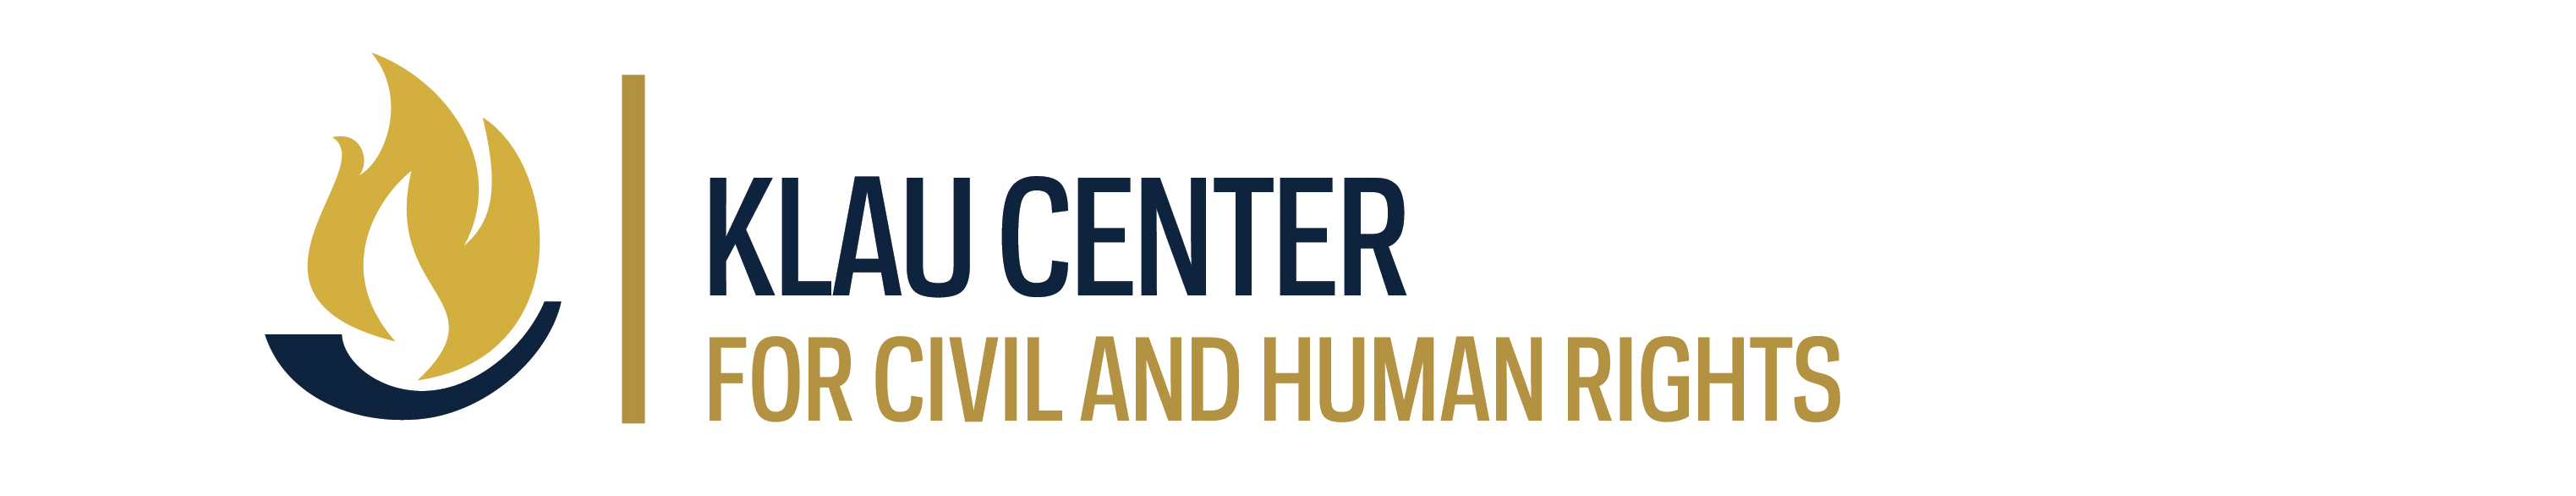 Klau Center for Civil and Human Rights